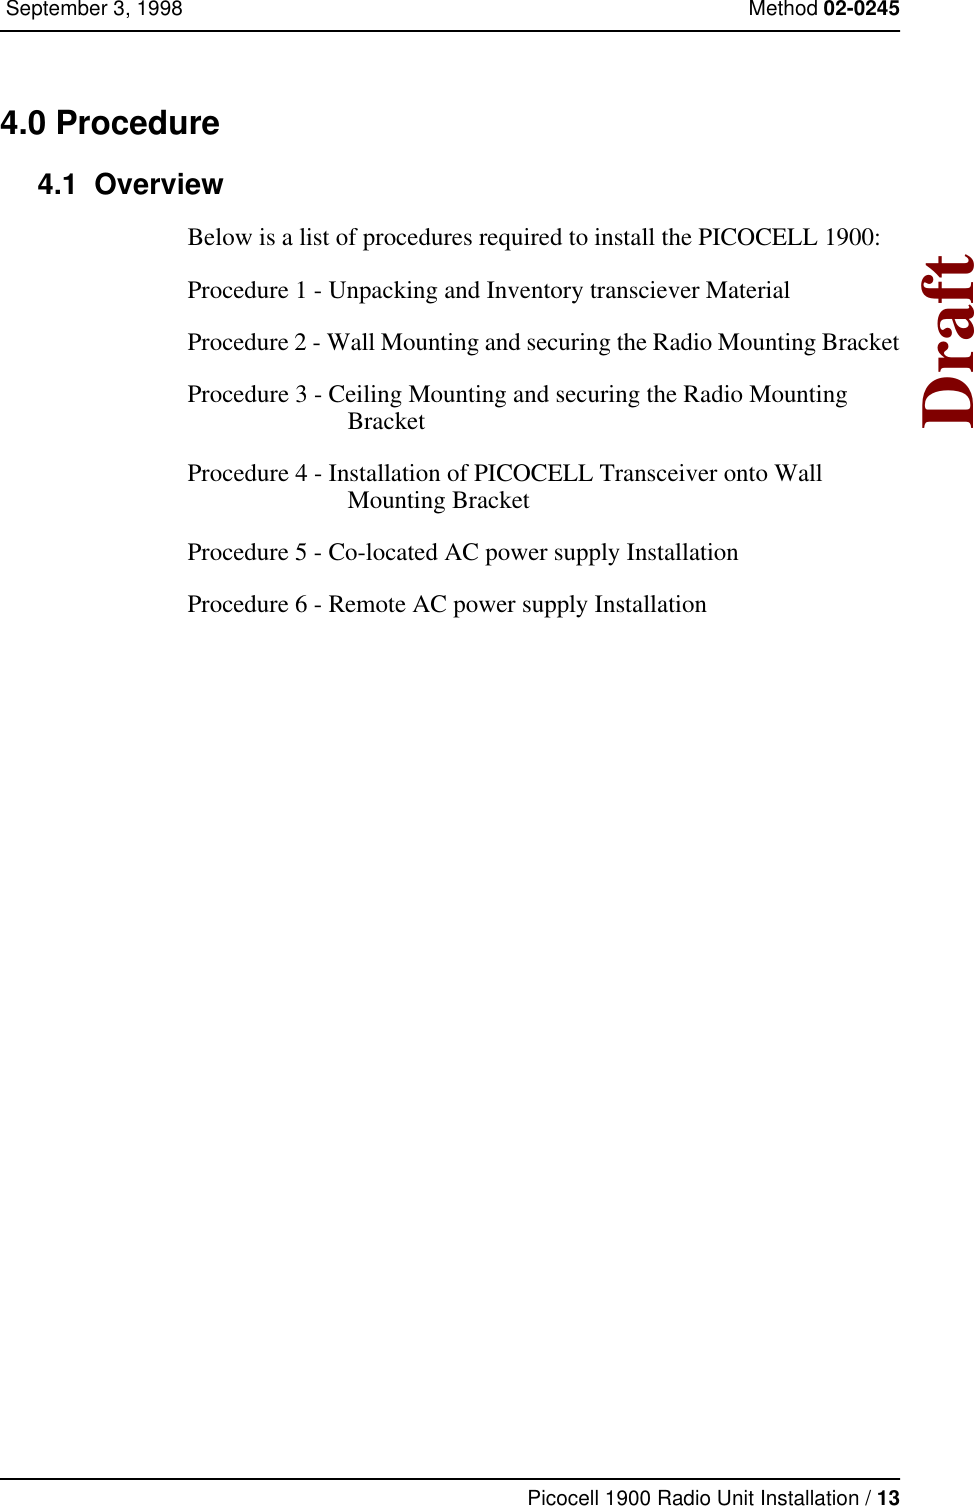 Picocell 1900 Radio Unit Installation / 13 September 3, 1998 Method 02-0245Draft4.0 Procedure 4.1  OverviewBelow is a list of procedures required to install the PICOCELL 1900:Procedure 1 - Unpacking and Inventory transciever MaterialProcedure 2 - Wall Mounting and securing the Radio Mounting Bracket Procedure 3 - Ceiling Mounting and securing the Radio Mounting BracketProcedure 4 - Installation of PICOCELL Transceiver onto Wall Mounting BracketProcedure 5 - Co-located AC power supply InstallationProcedure 6 - Remote AC power supply Installation